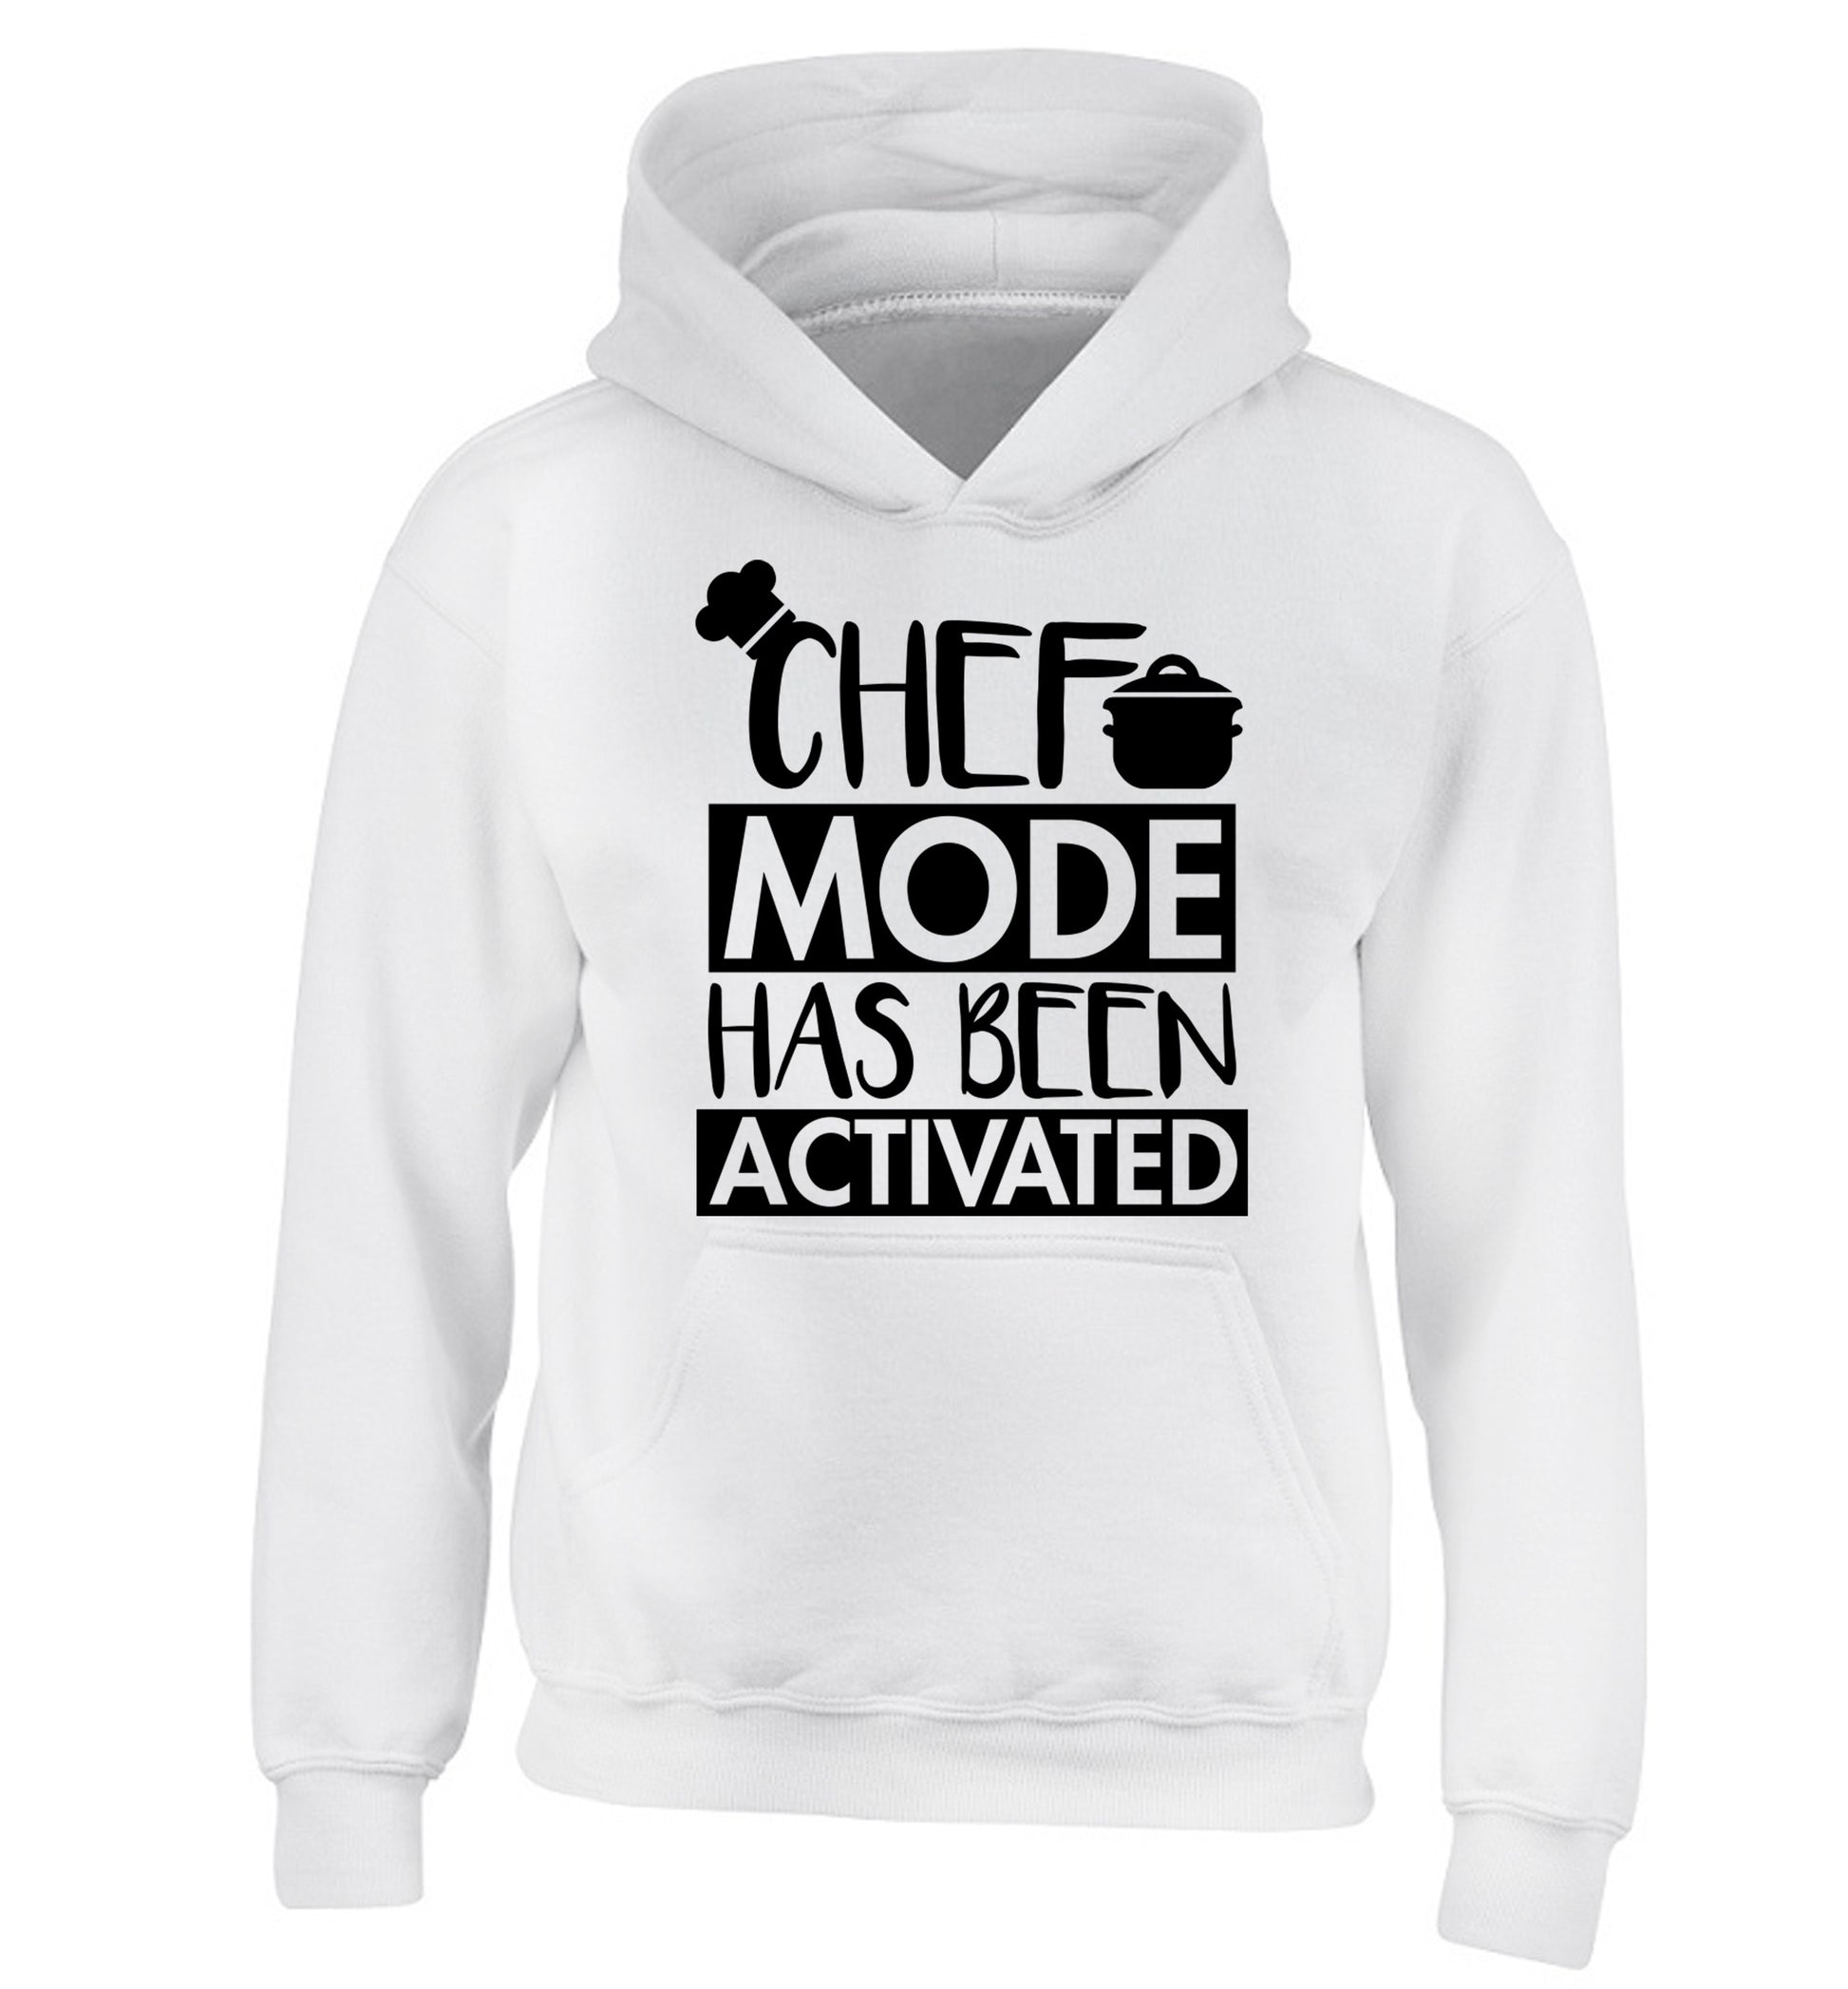 Chef mode has been activated children's white hoodie 12-14 Years